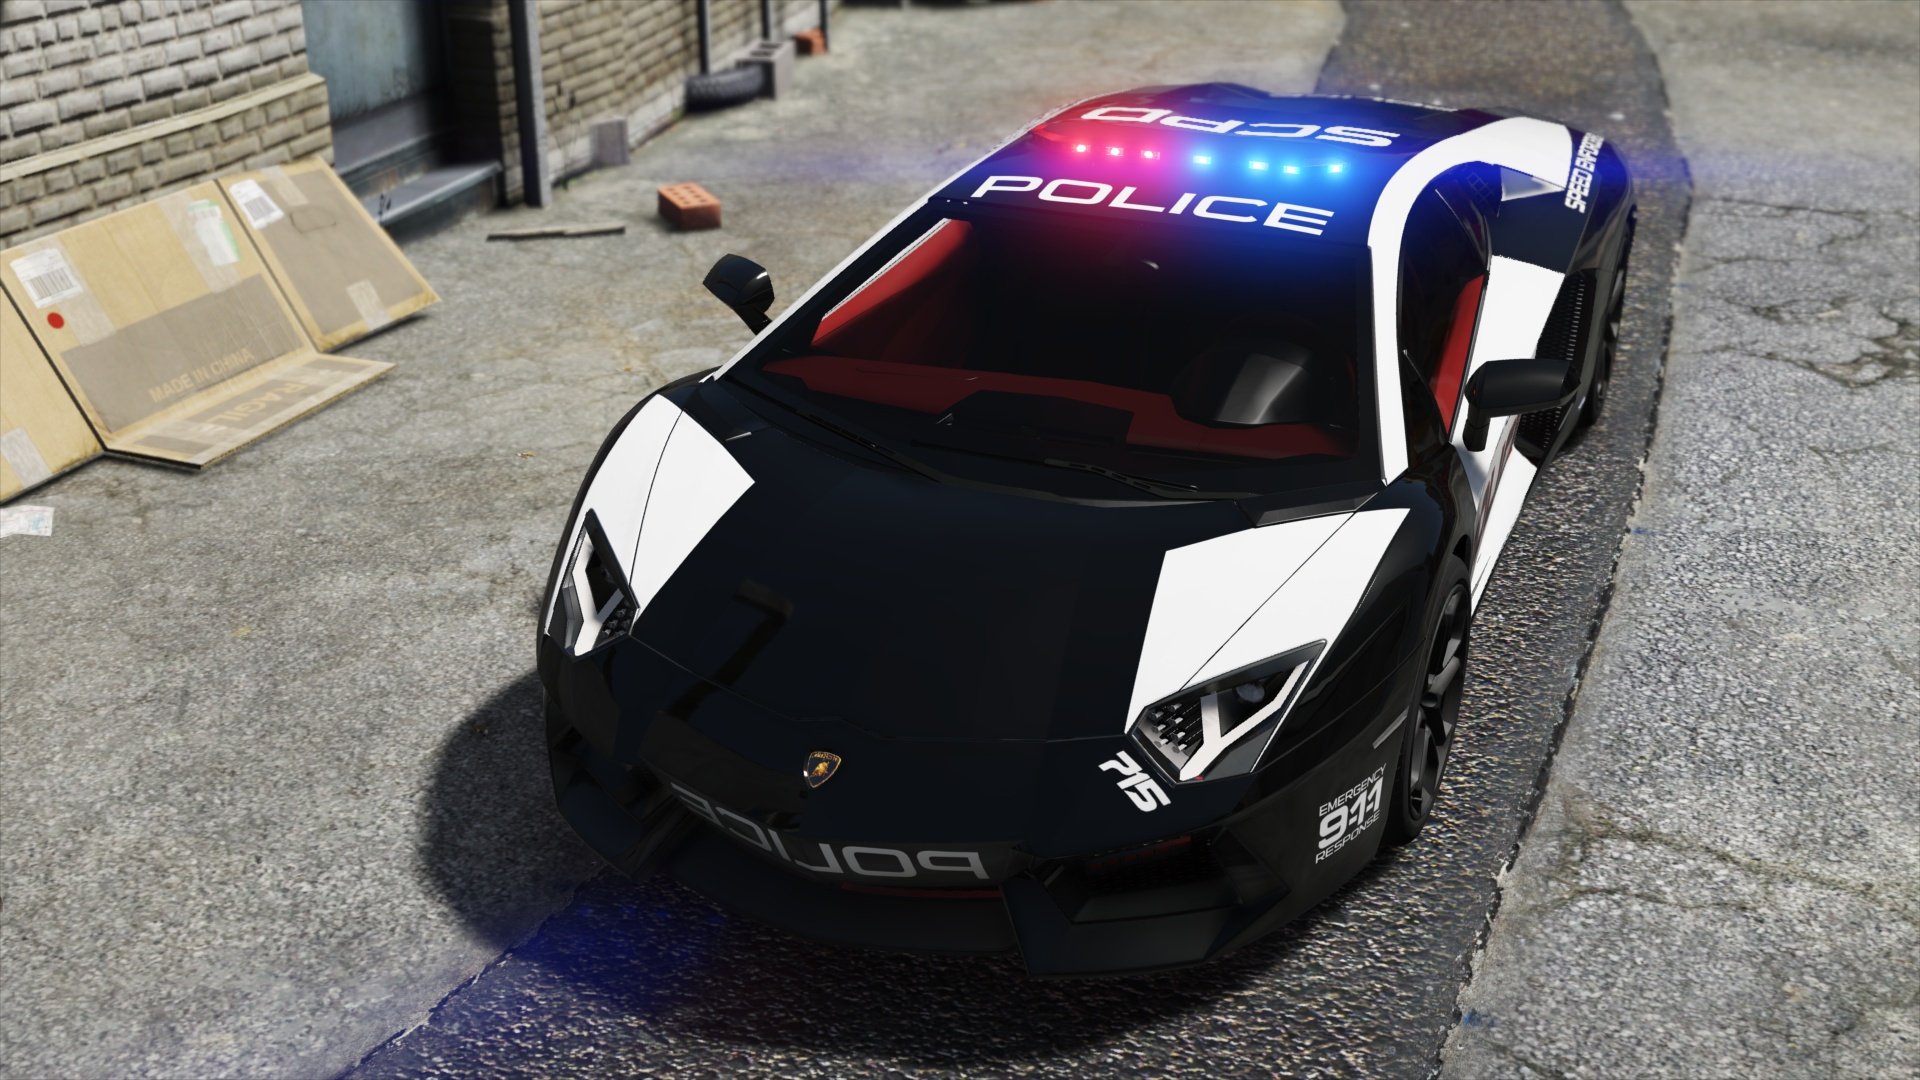 Top 5 Best Police Games On Web! - LamboCARS